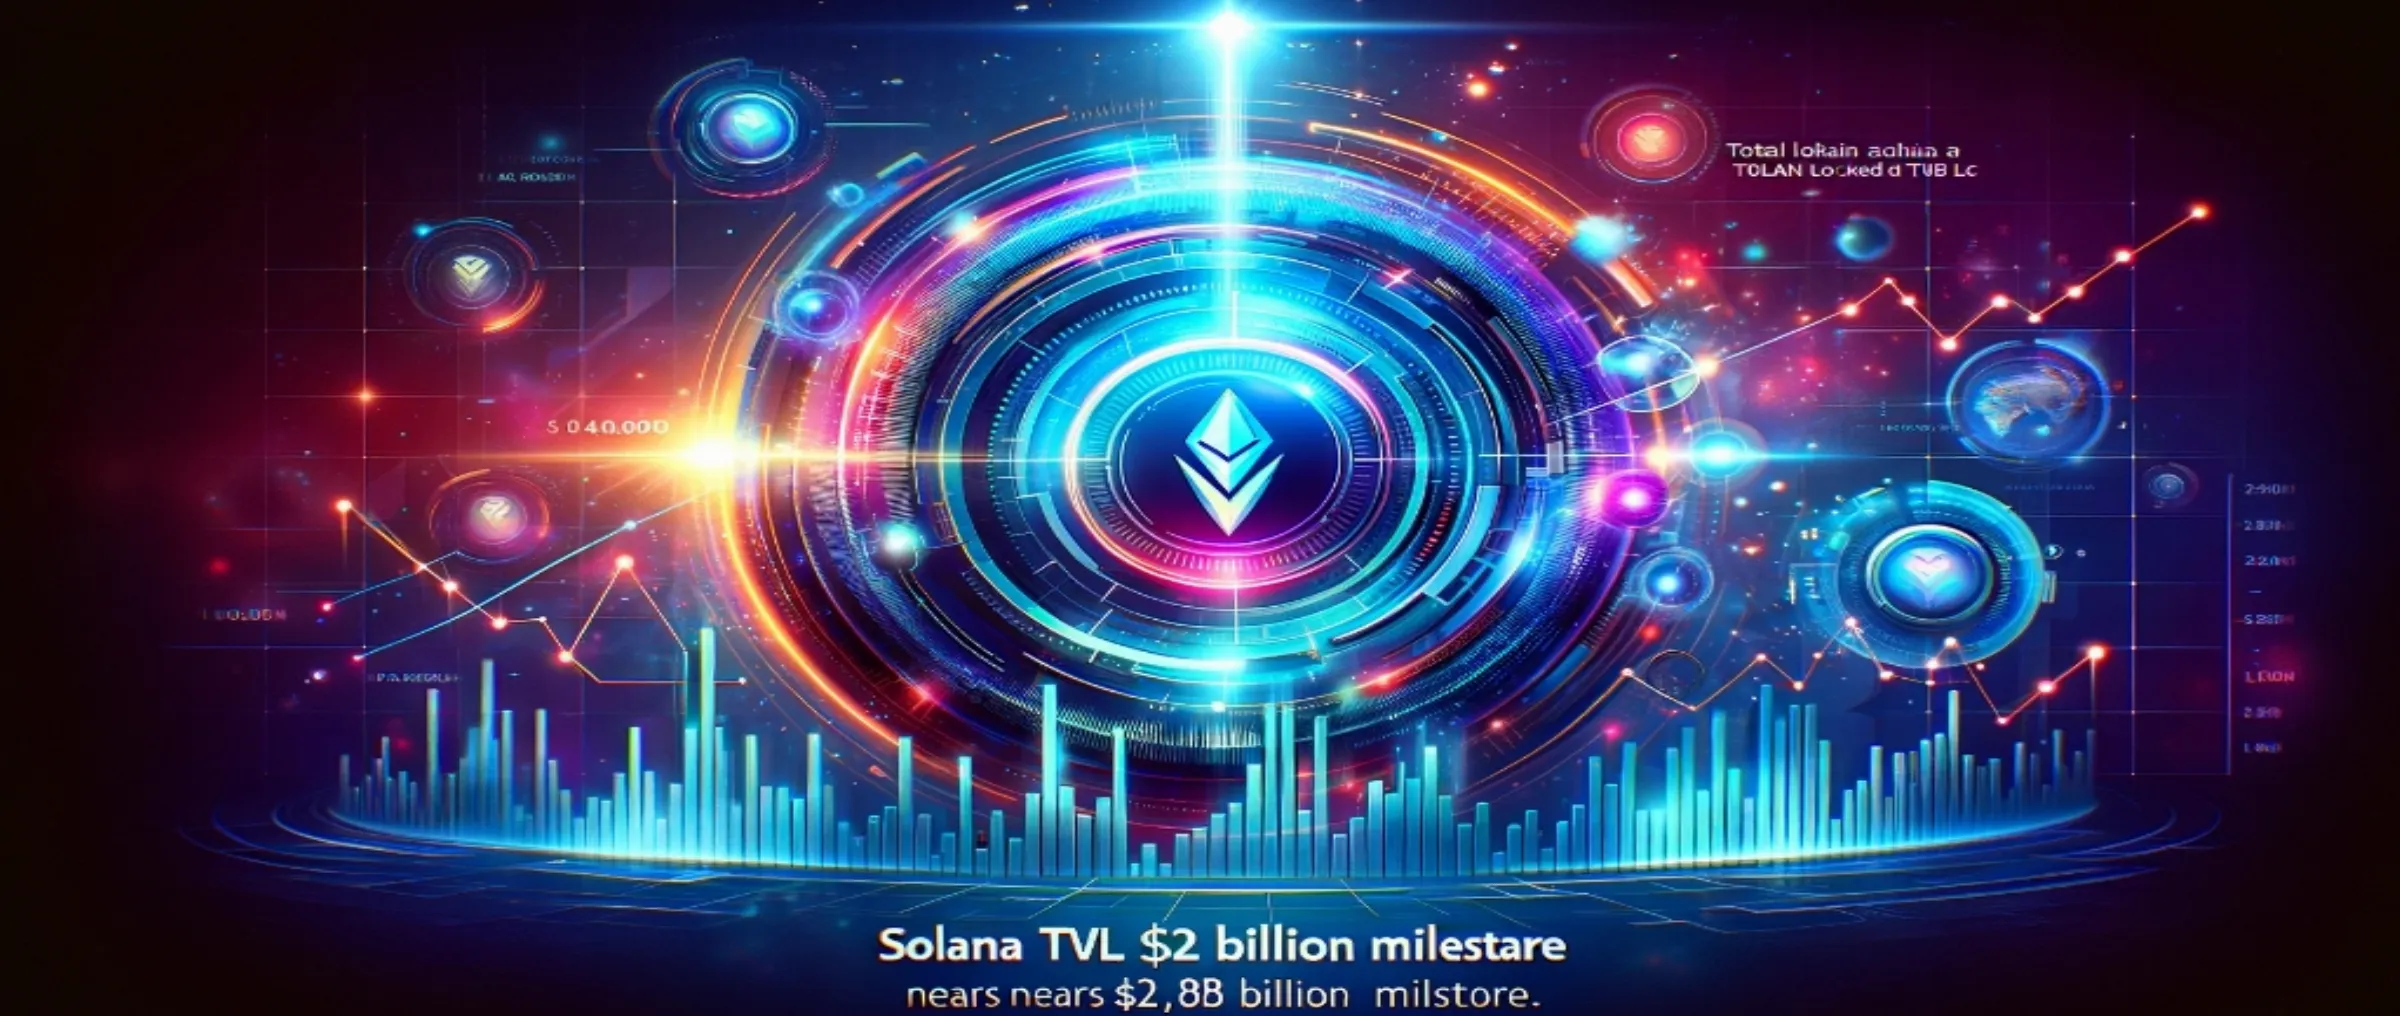 TVL on the Solana network is approaching the $2 billion mark